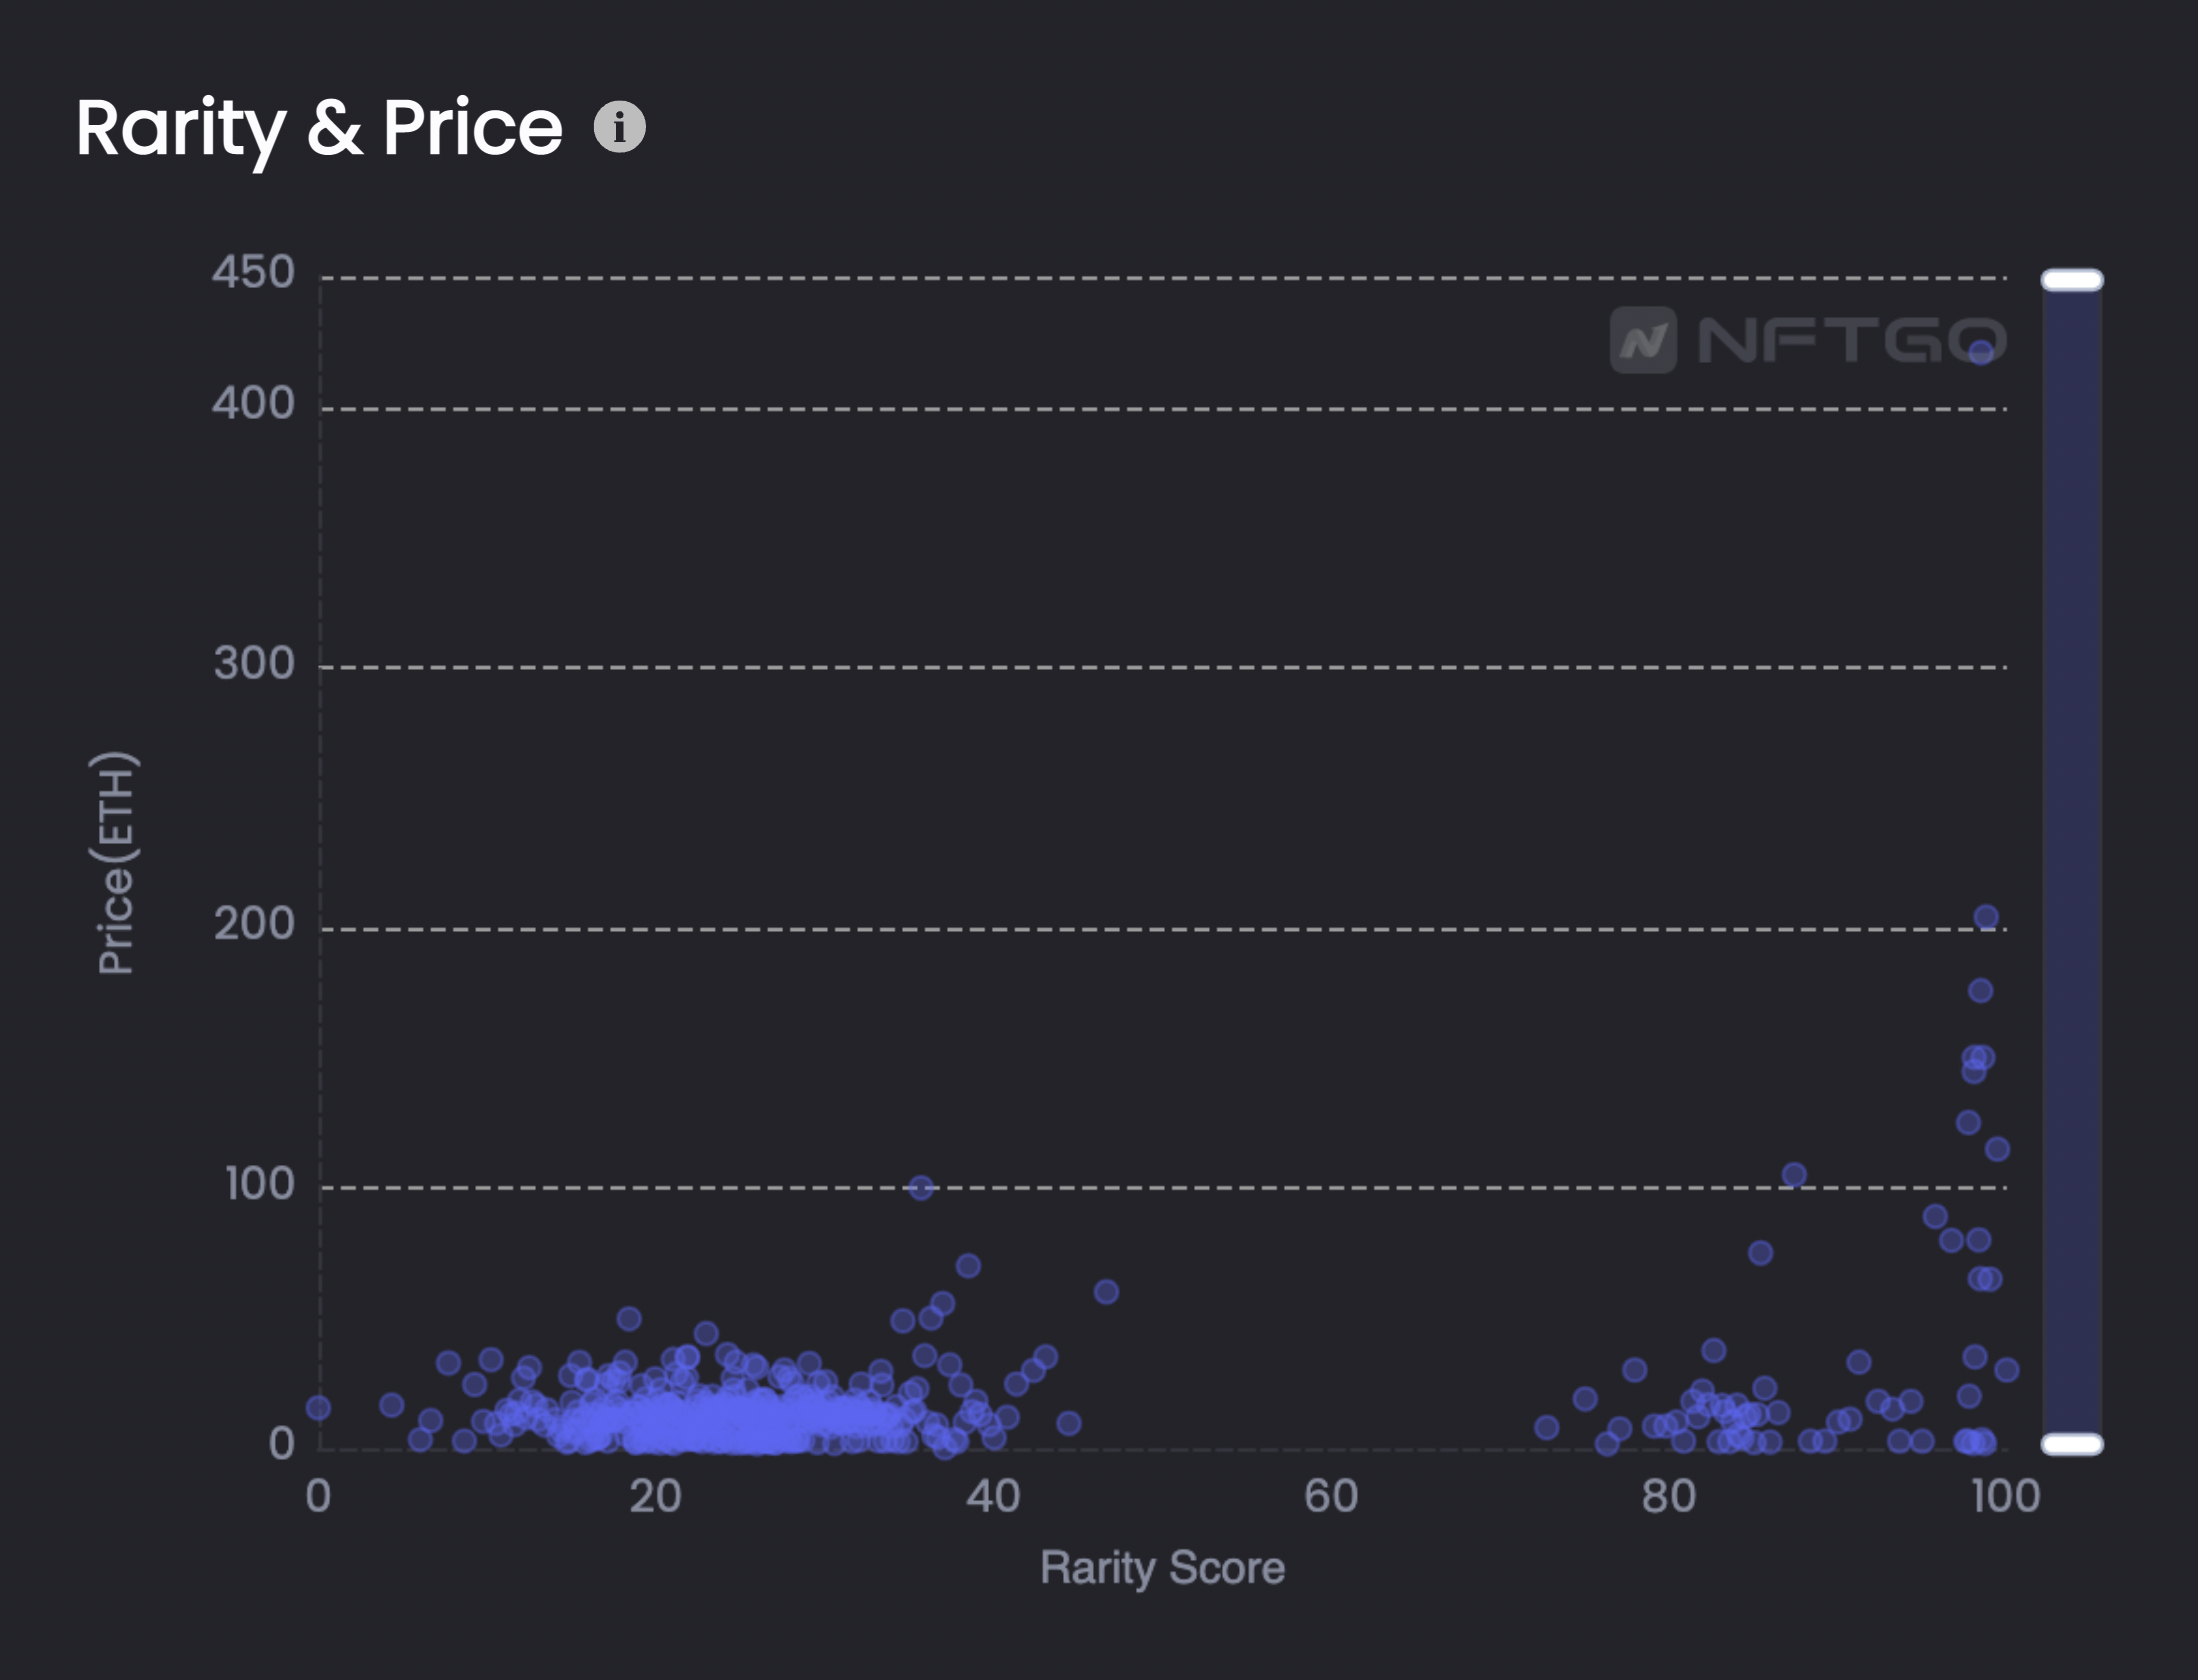 Azuki Rarity Score vs Last Sale Price. Clearly, modal peak around the floor and a long tail.